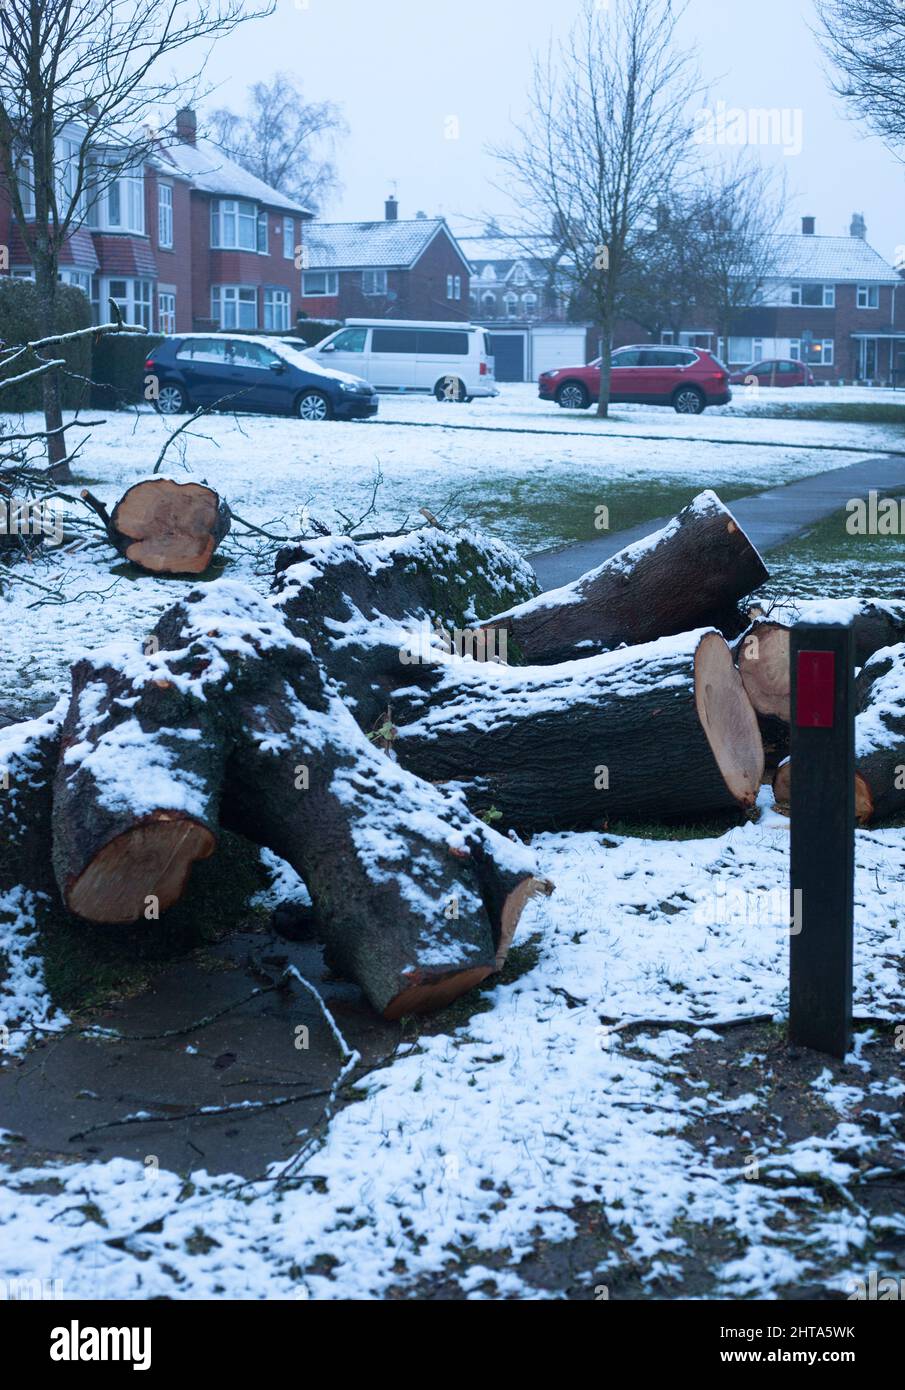 Snow in Beverley, East Yorkshire UK and fallen roadside tree storm damage Storm Eunice February 2022 Stock Photo